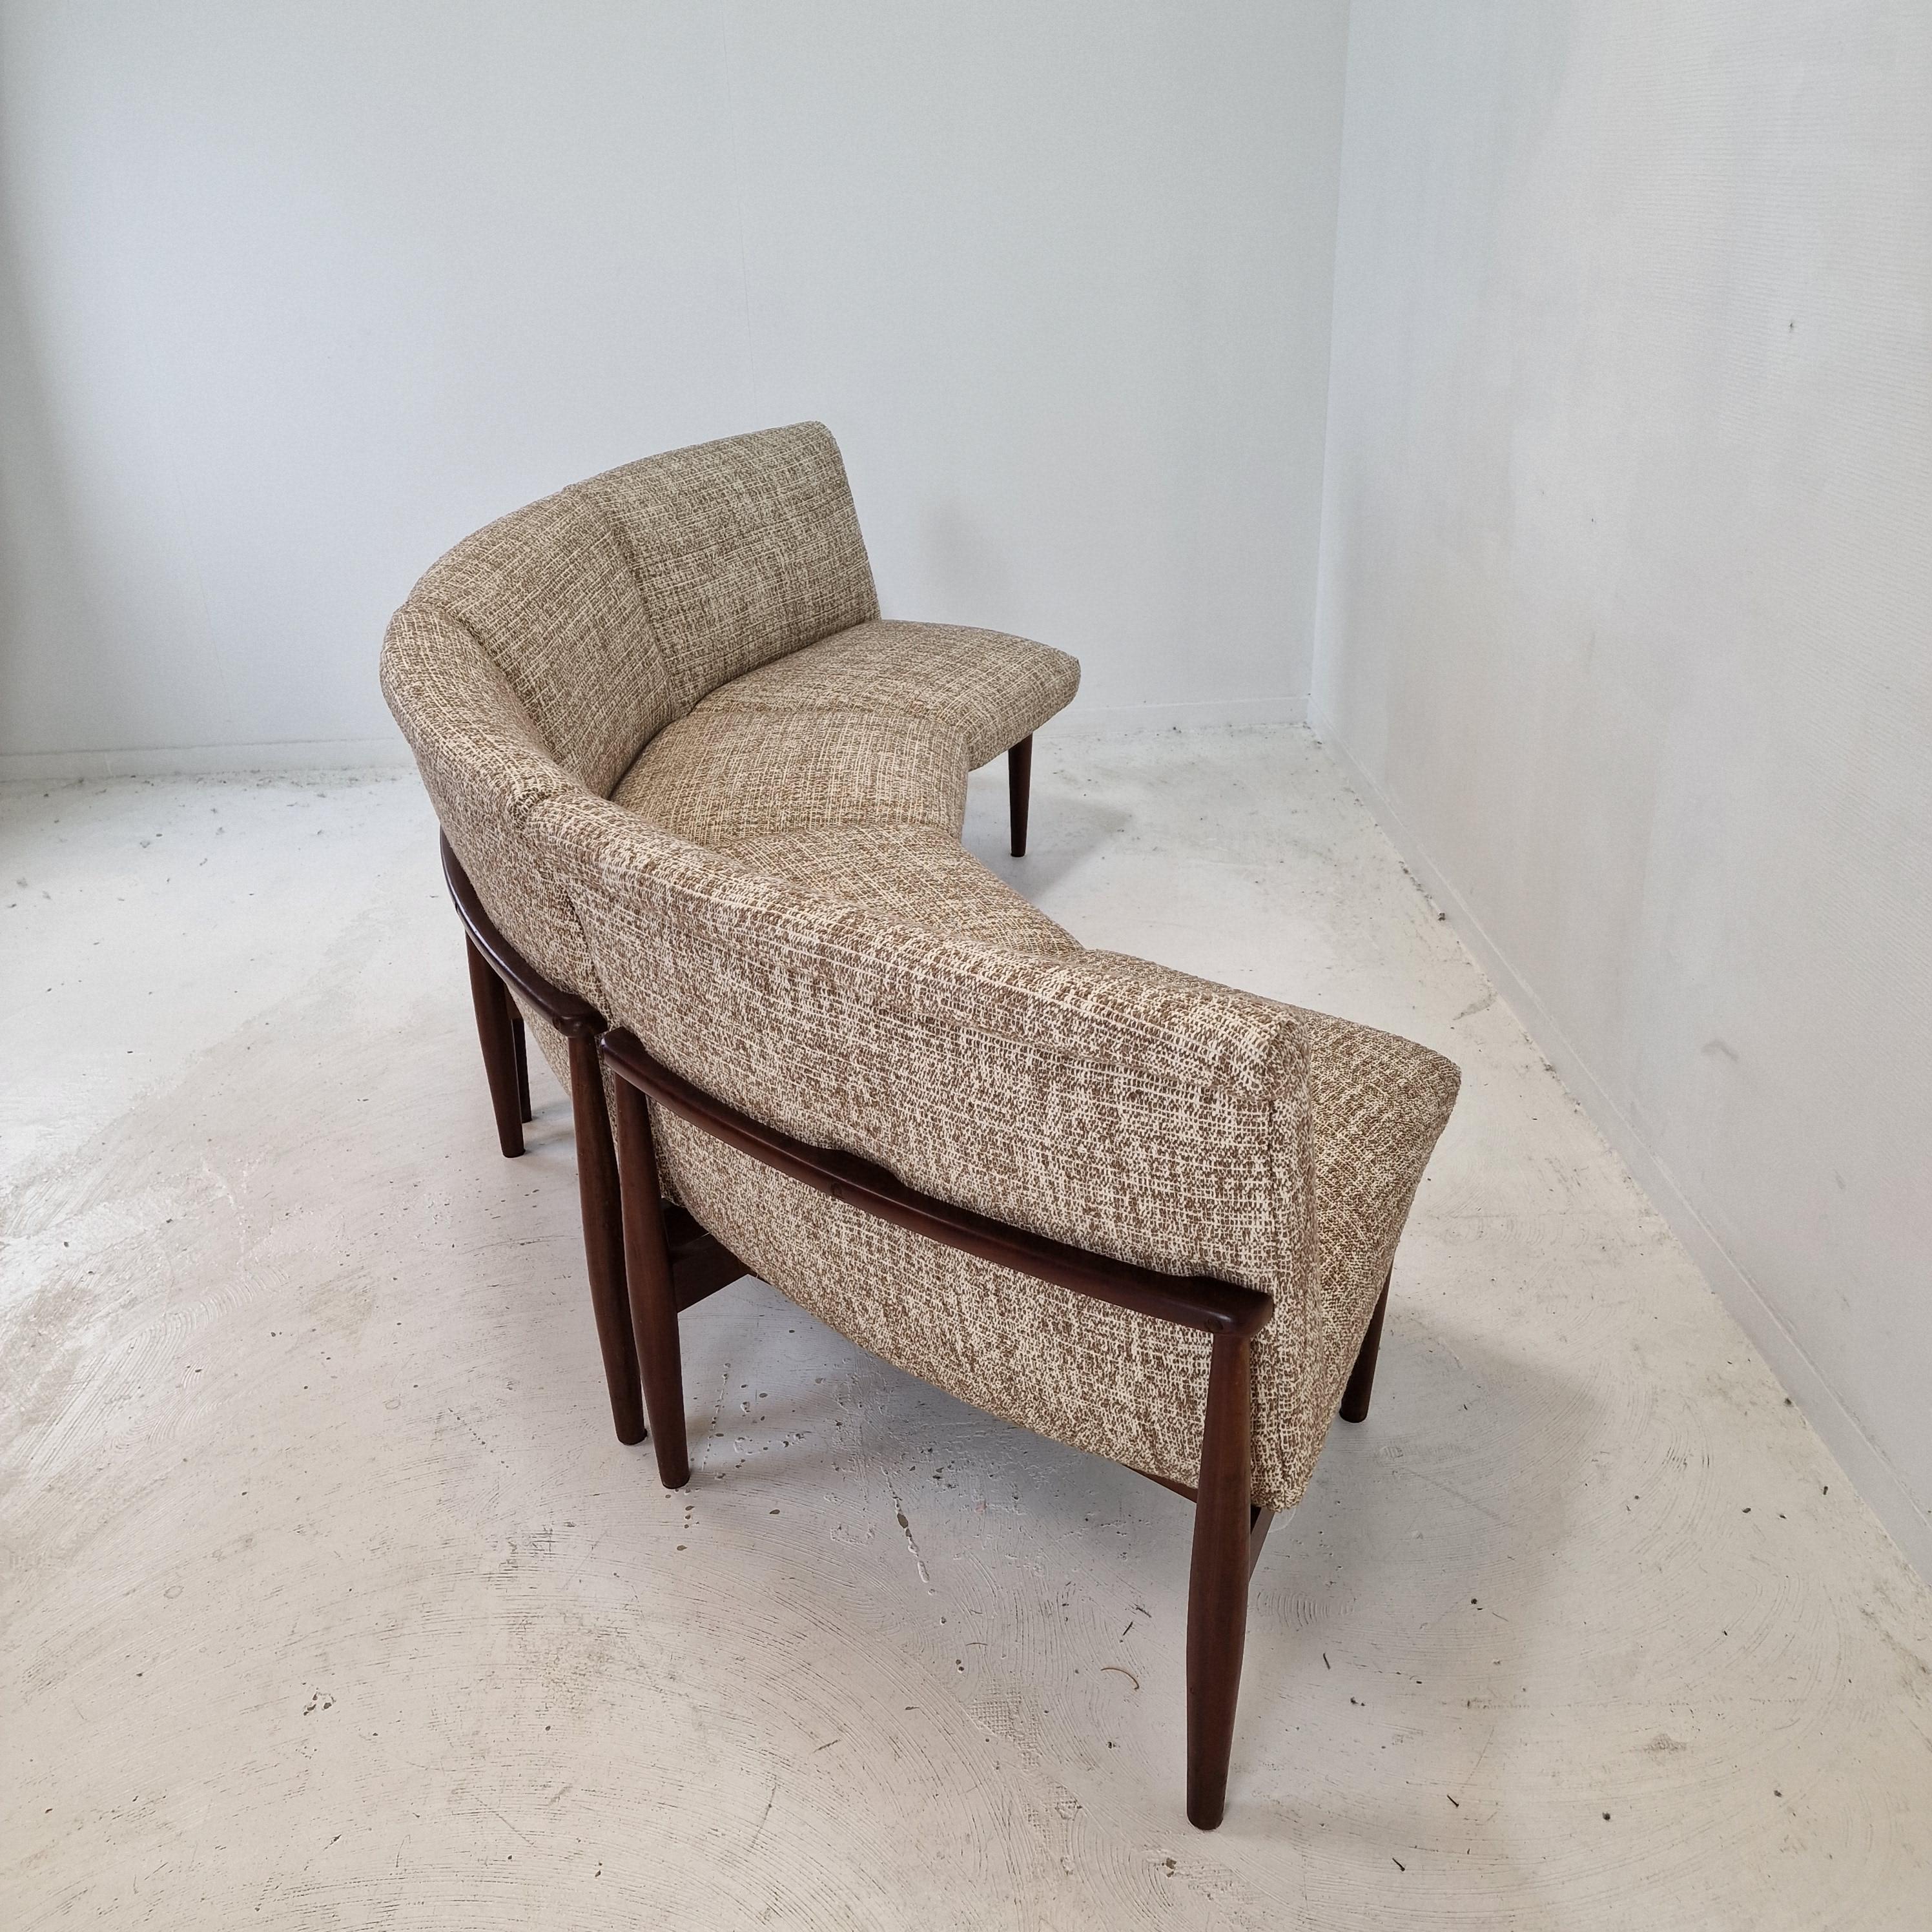 Fabric Midcentury Round Bench of 4 Teak Chairs, Denmark, 1960s For Sale